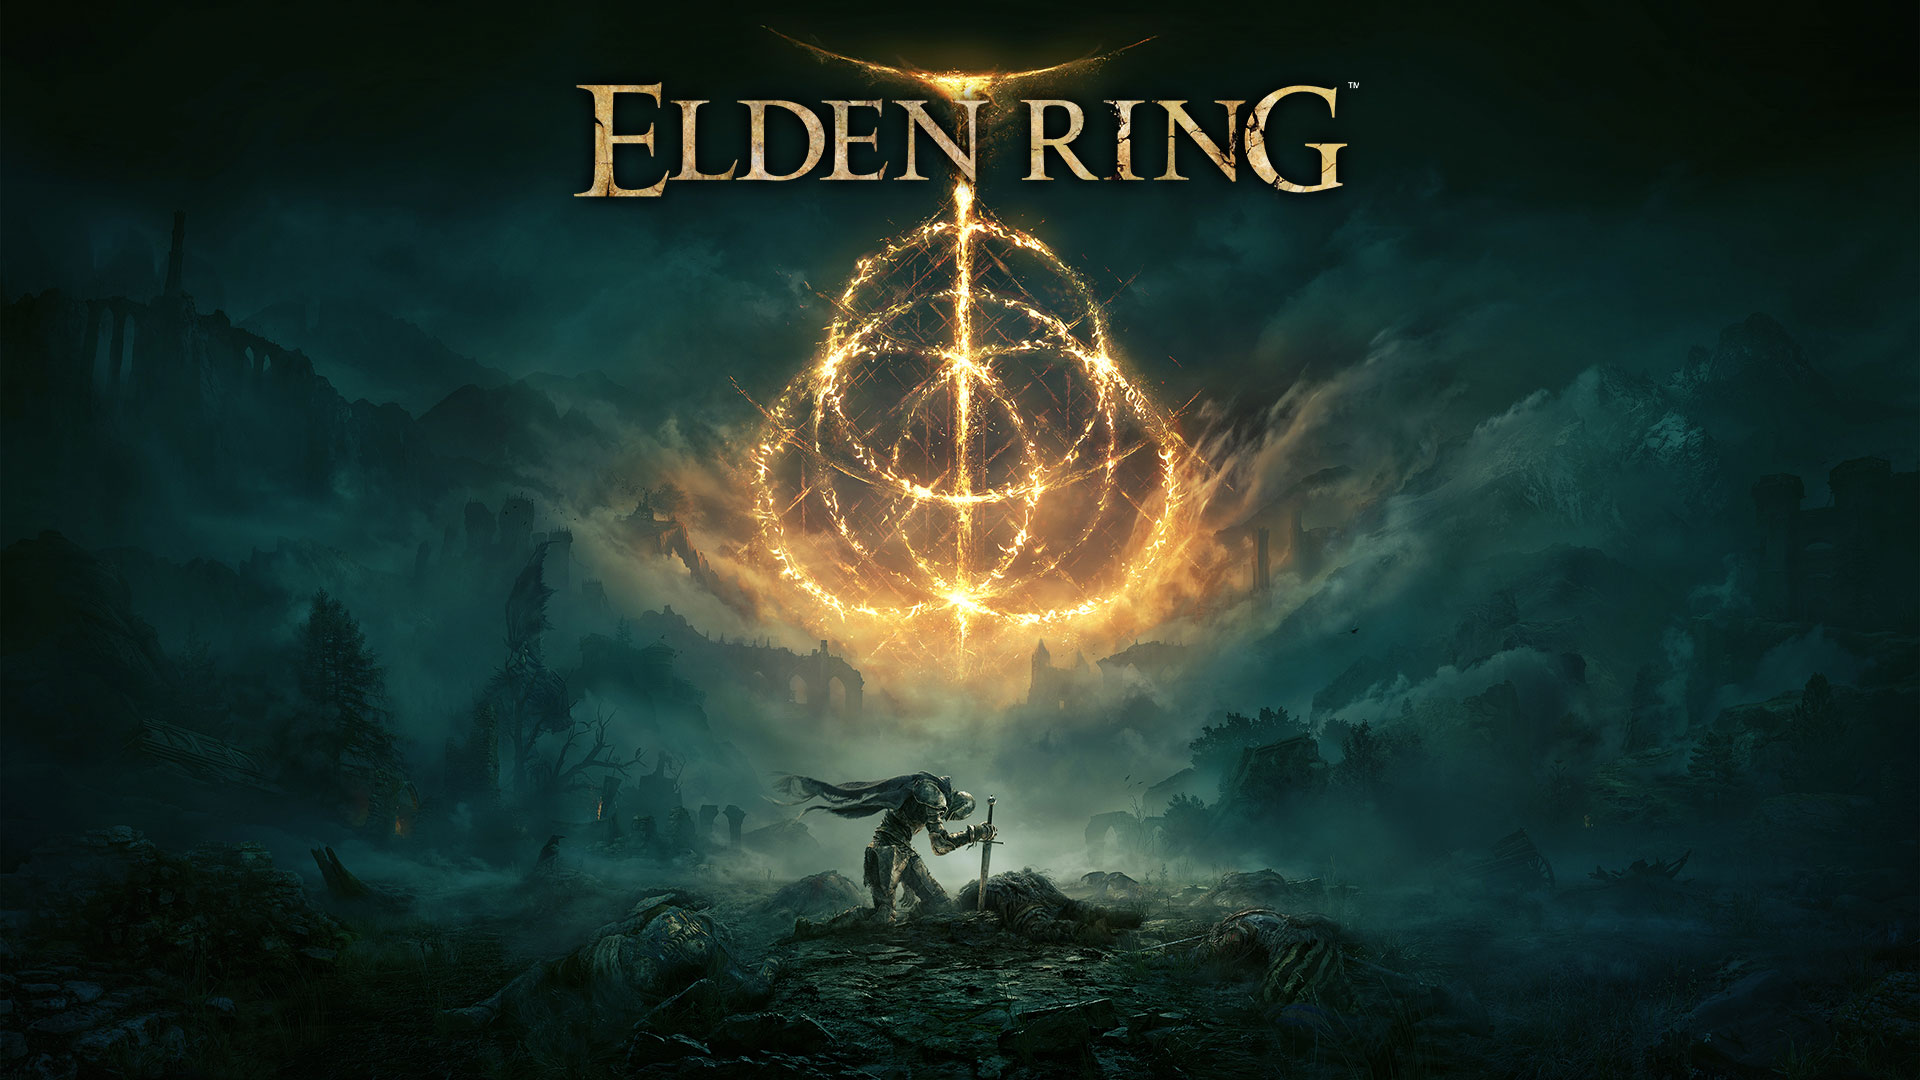 Elden Ring launches January 21, 2022